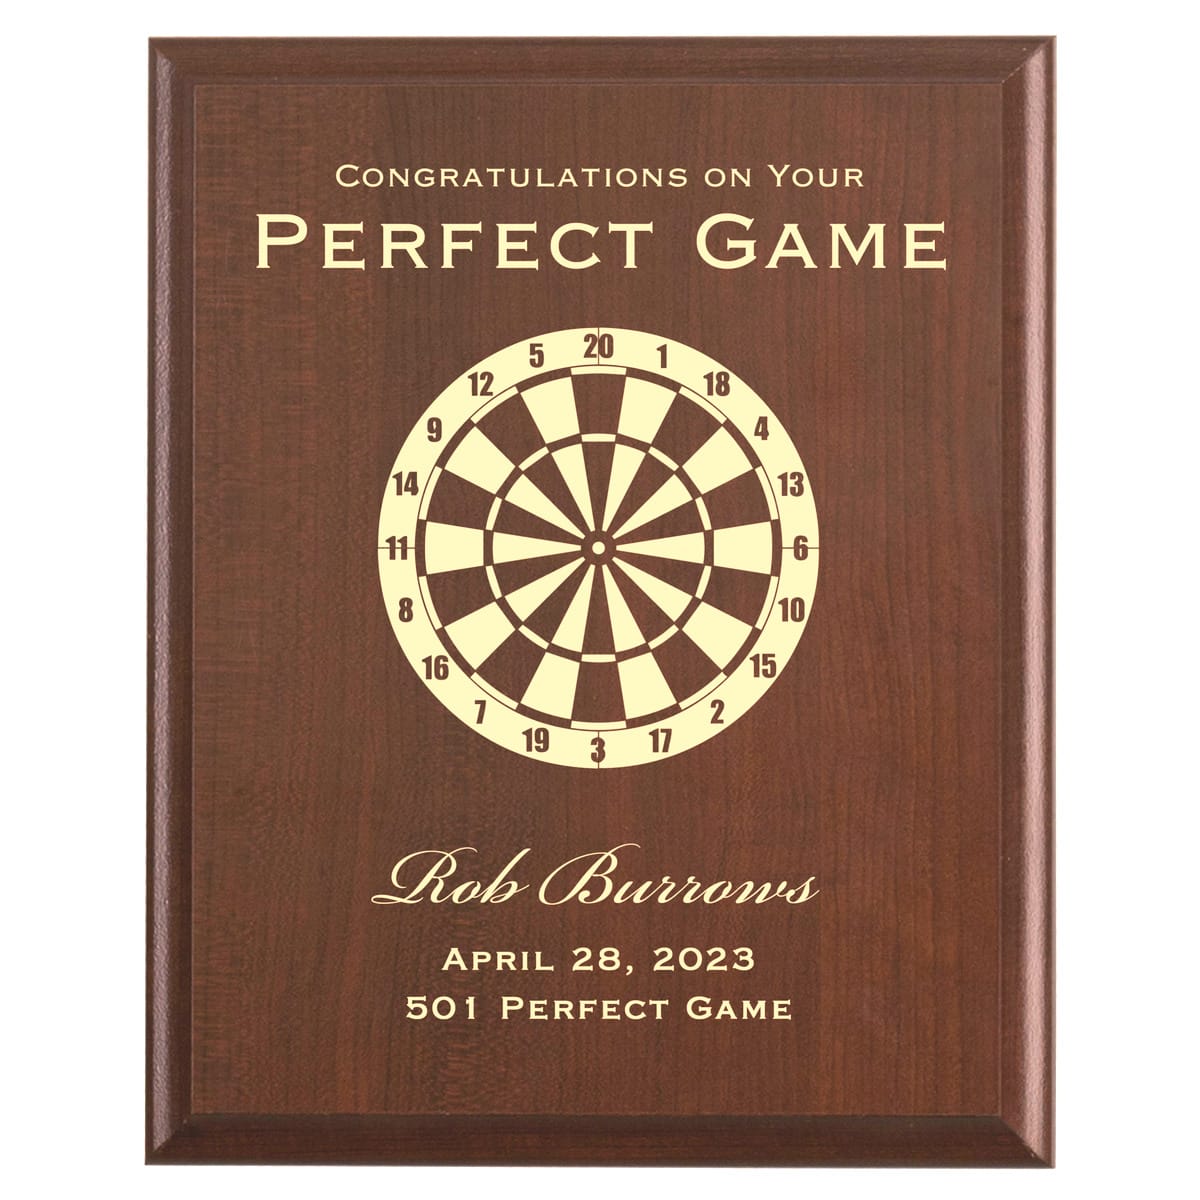 Plaque photo: Perfect Dart Game Award design with free personalization. Wood style finish with customized text.